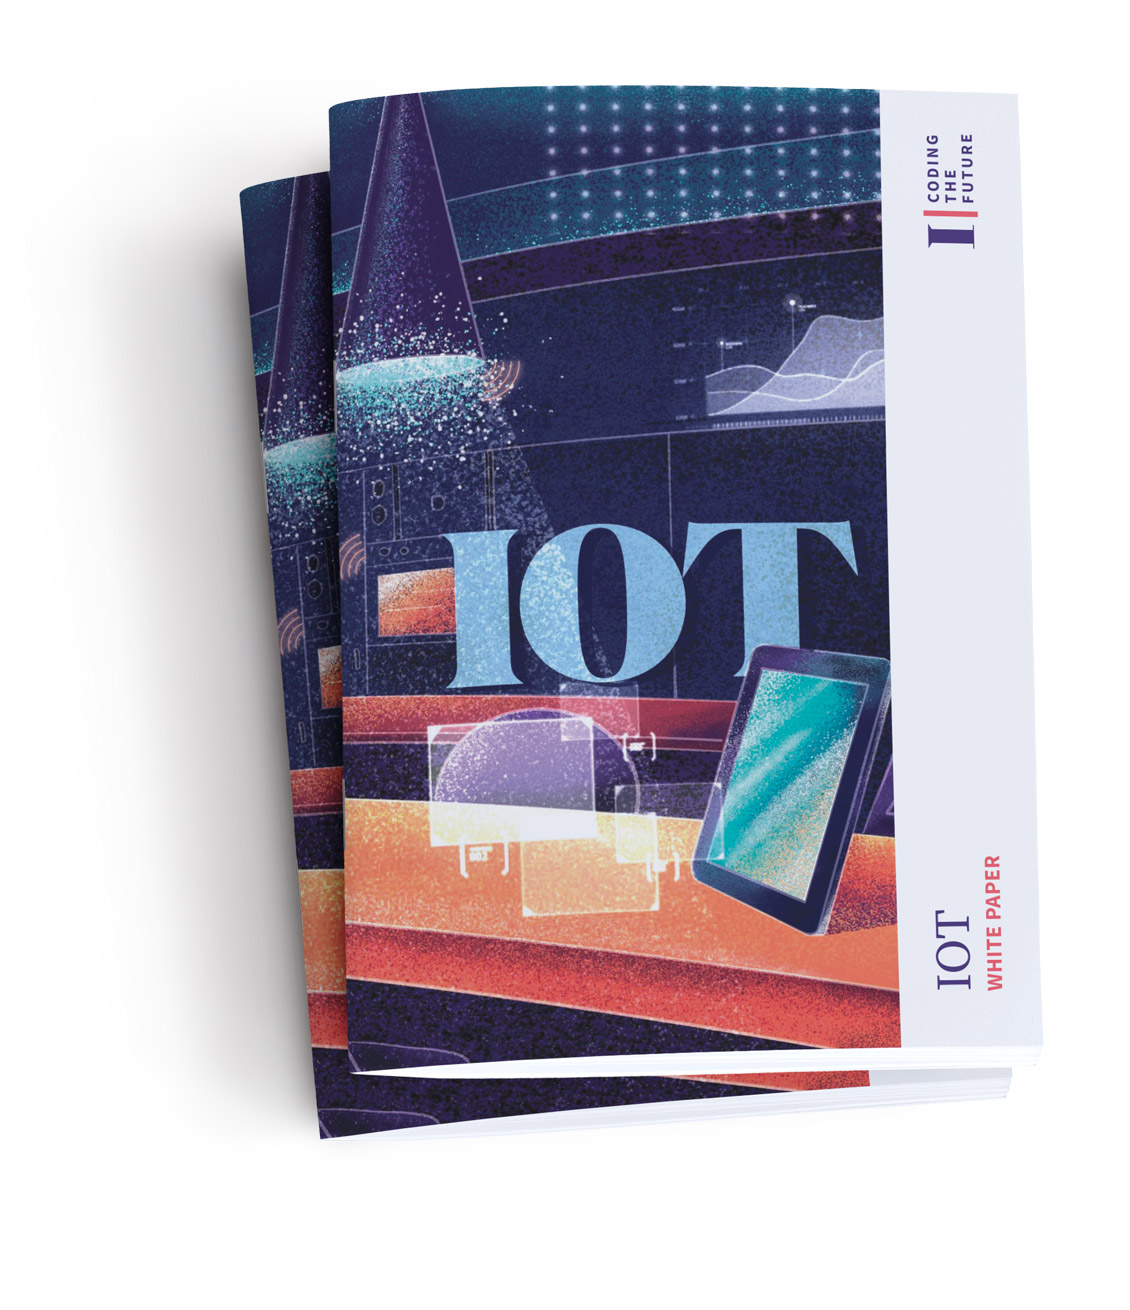 iot book cover